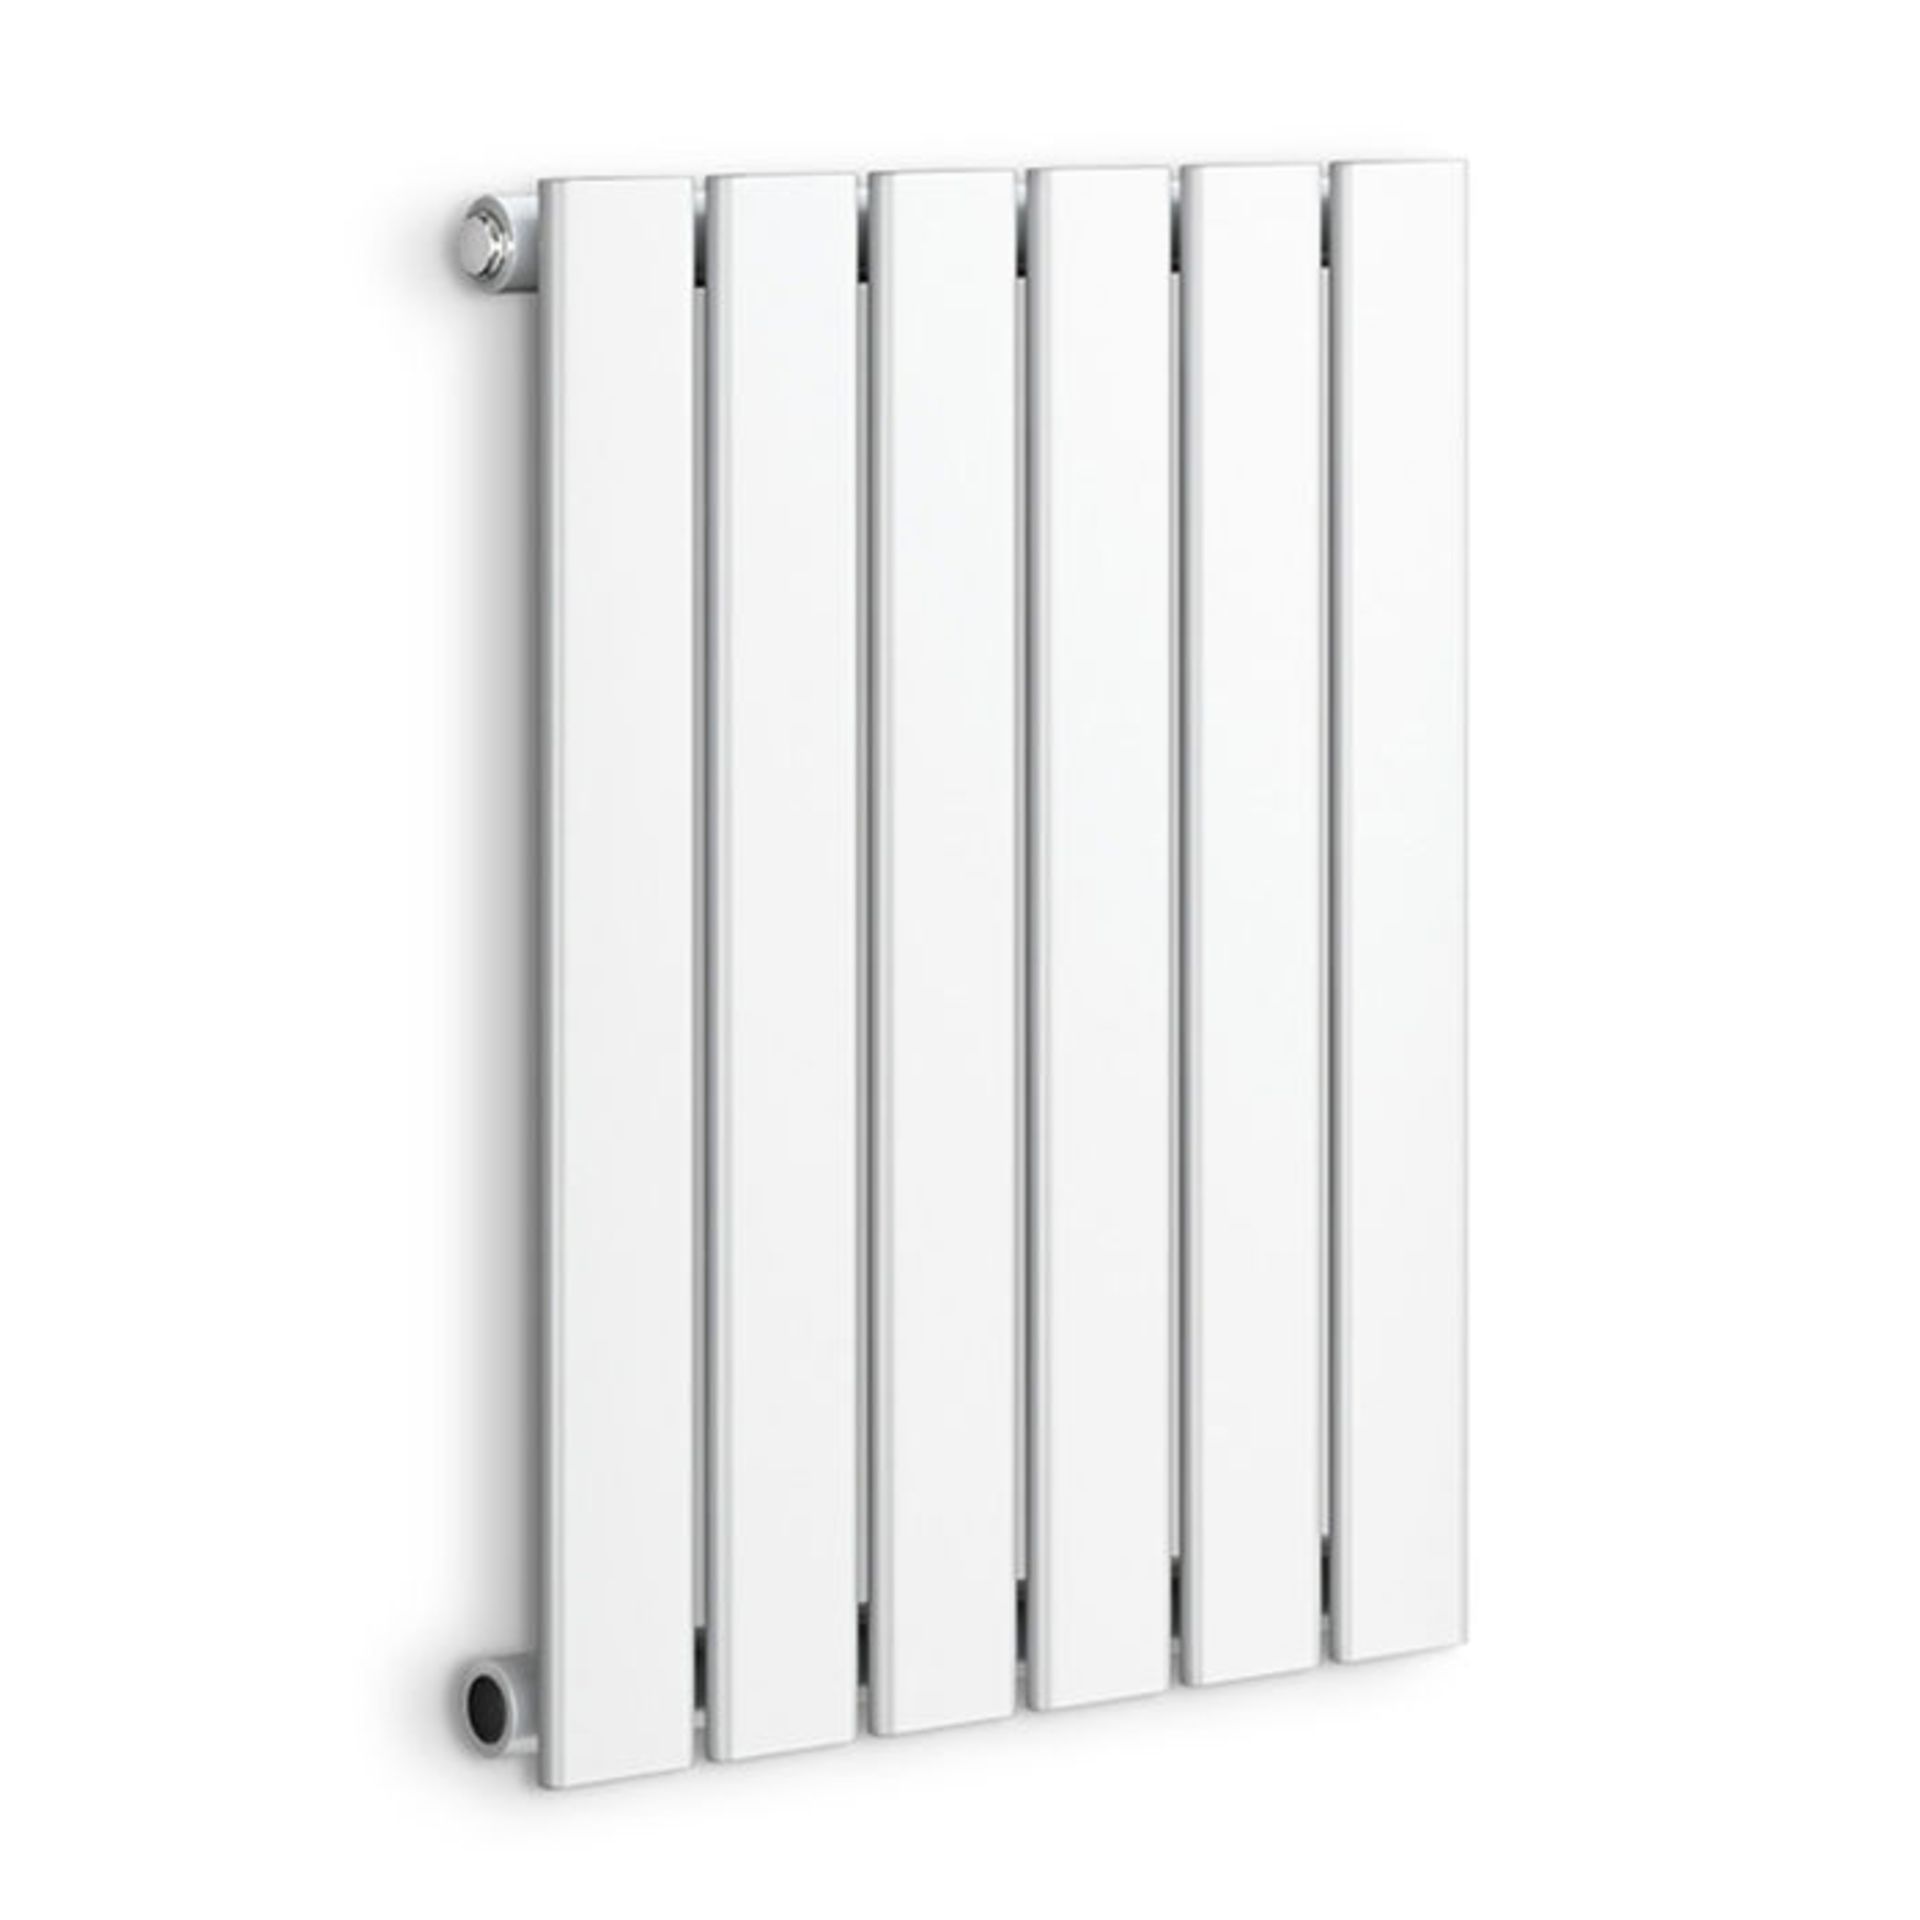 (PP19) 600x456mm White Panel Horizontal Radiator. RRP £153.99. Made with high quality low carbon